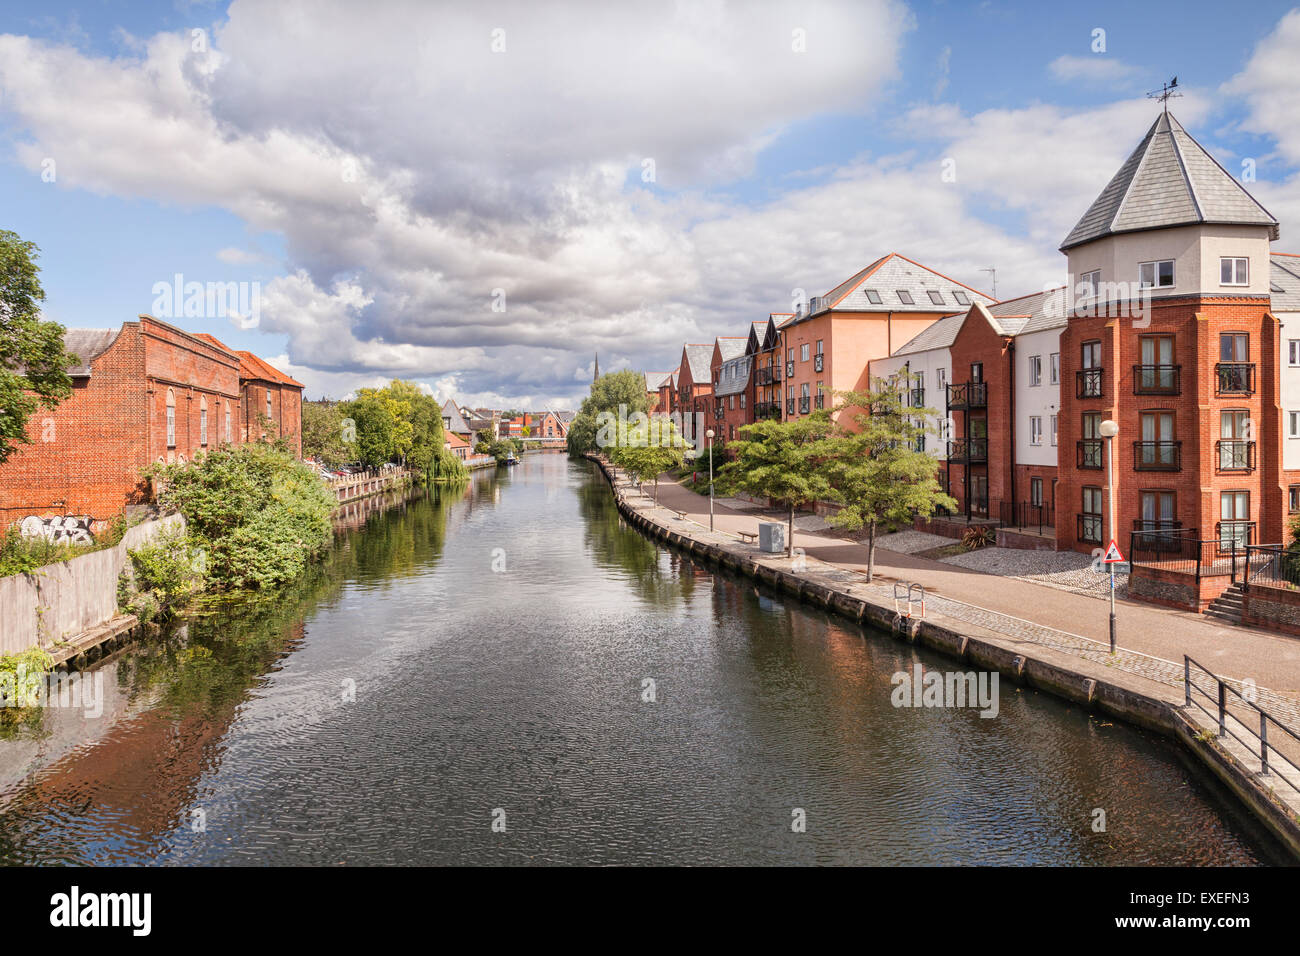 Apartments overlooking the River Wensum at Norwich, Norfolk, England Stock Photo